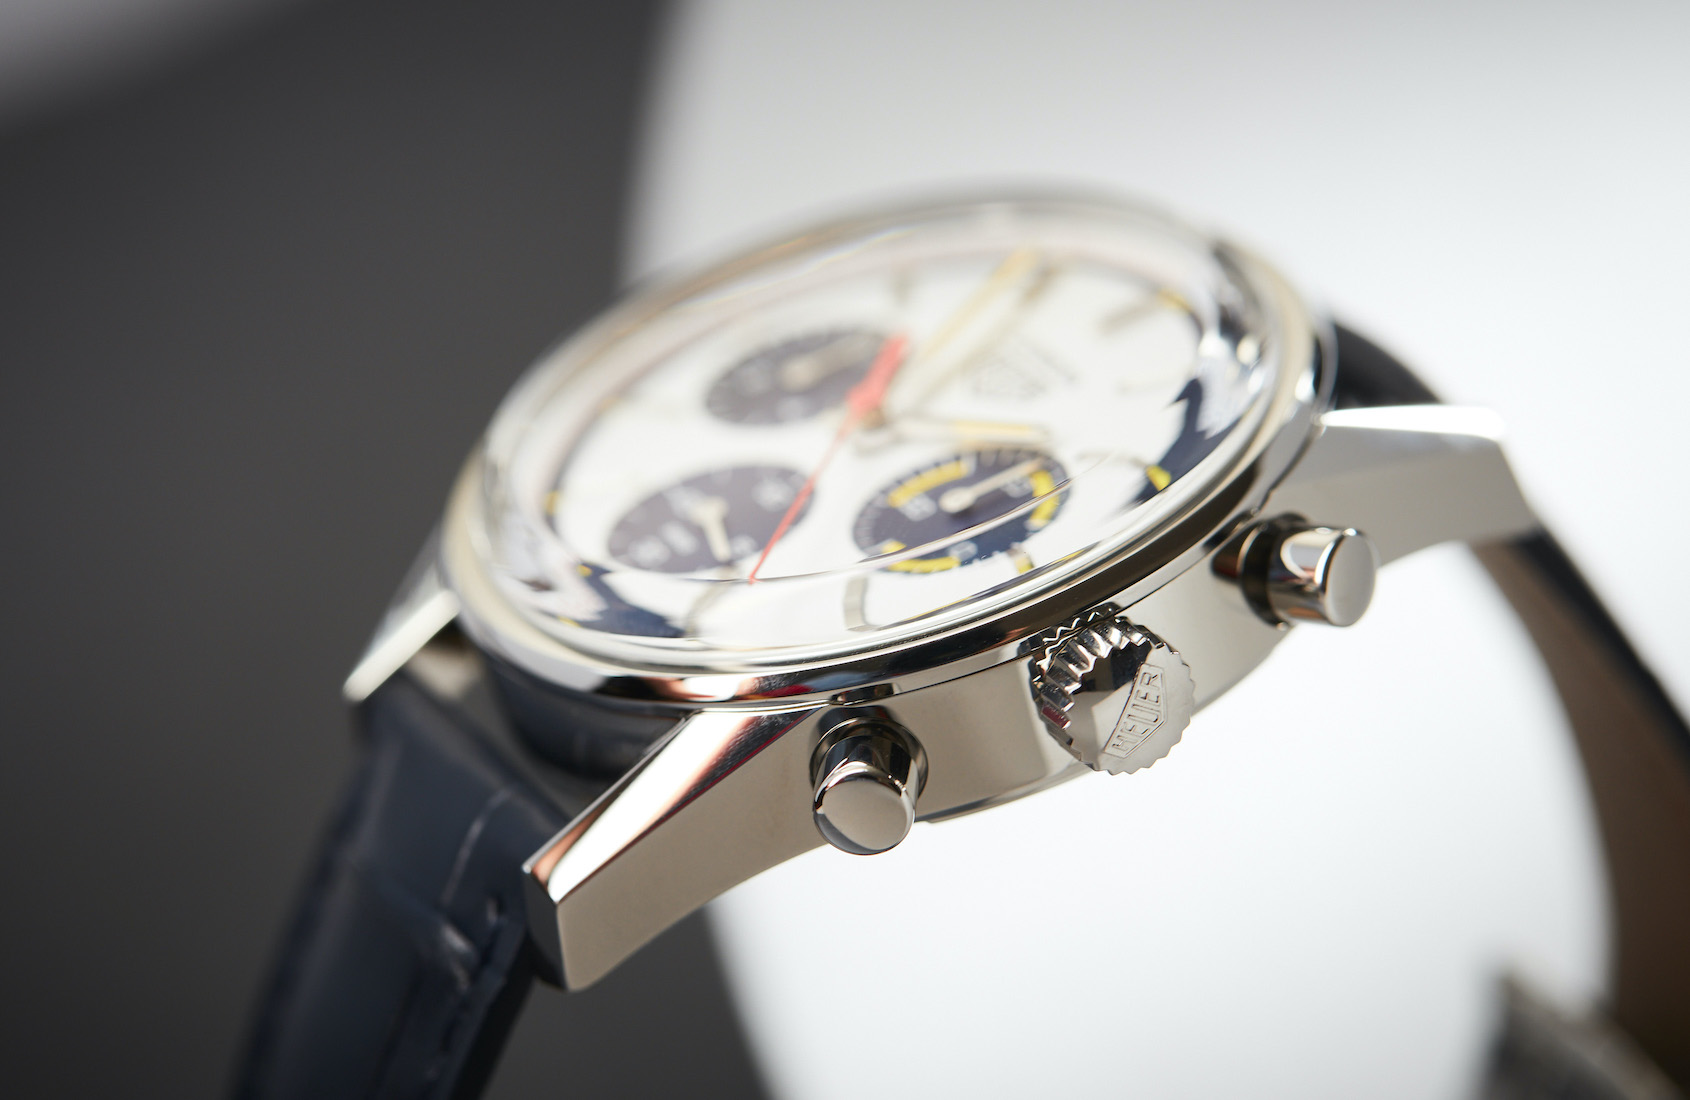 TAG Heuer Carrera 160 years Limited Editions